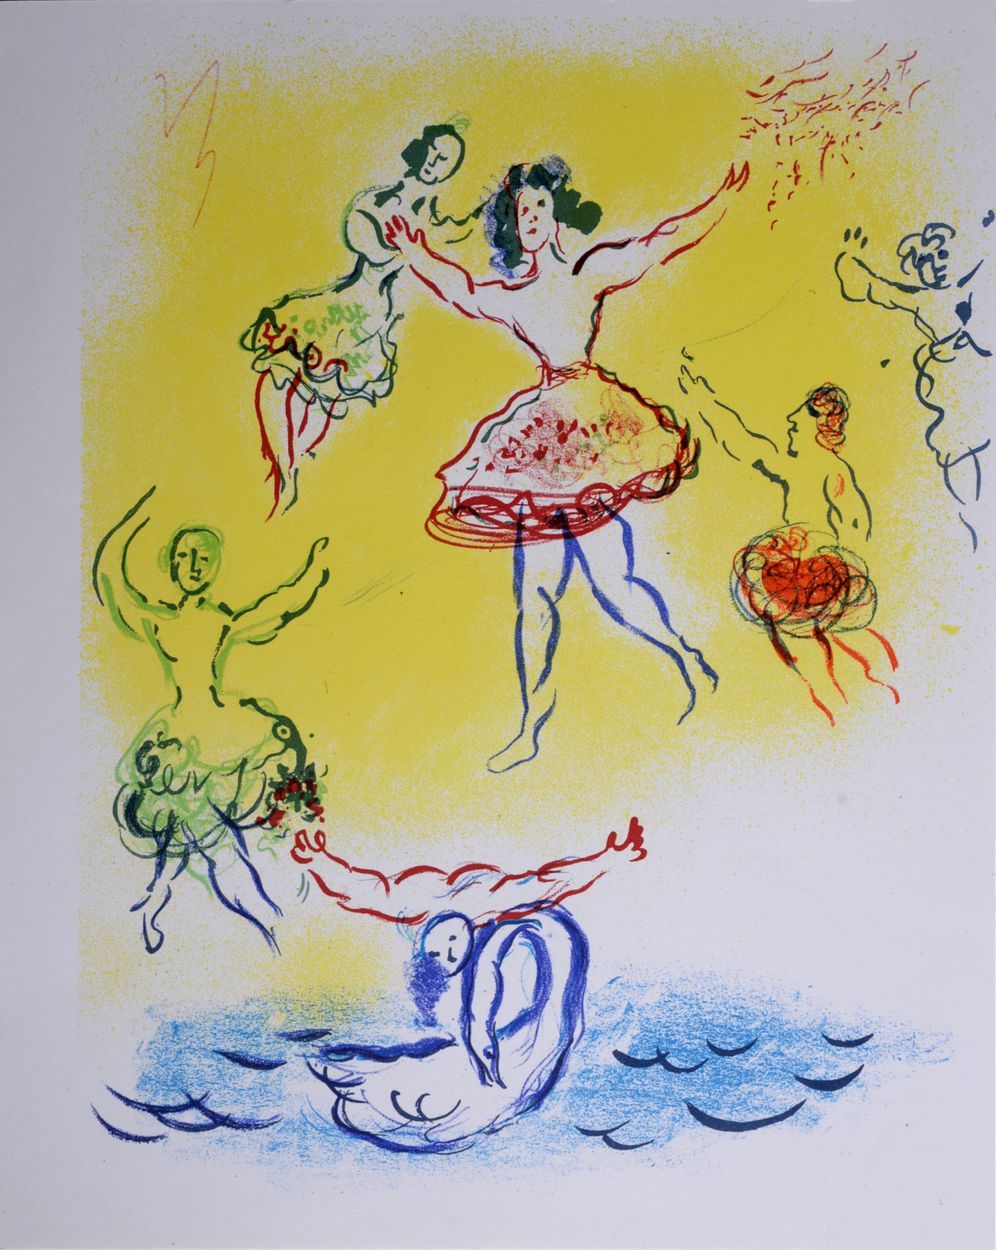 Marc Chagall Marc Chagall (1887-1985)

Sketch for Swan Lake, c. 1965

Lithograph&hellip;